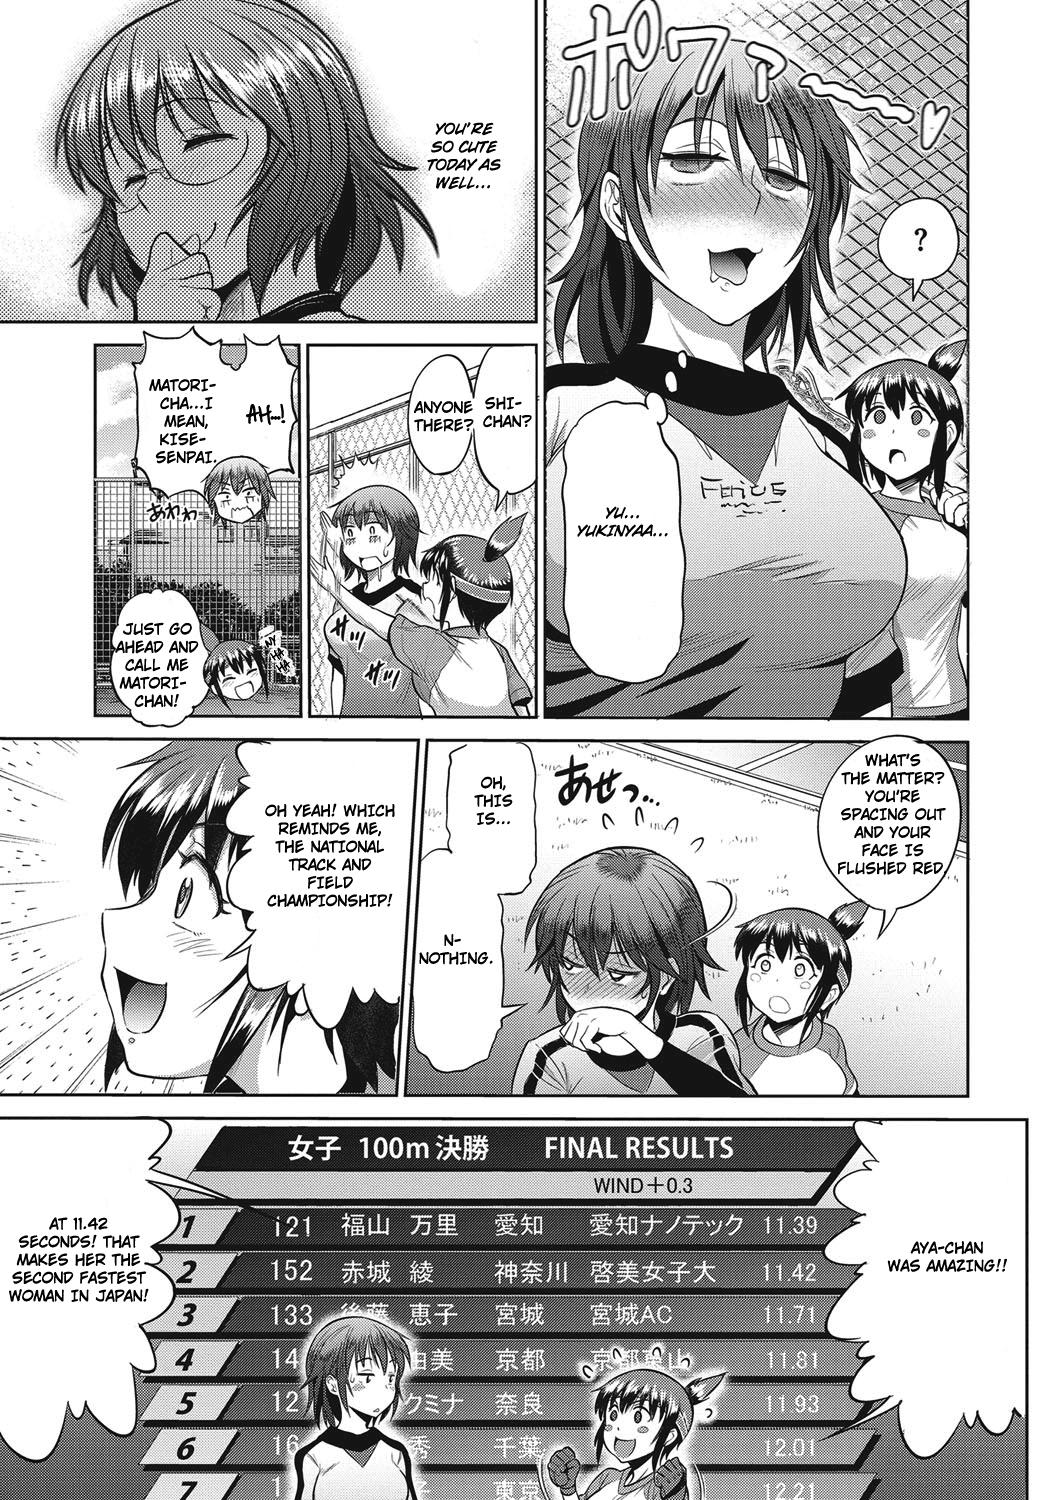 Usa [DISTANCE] Joshi Lacu! - Girls Lacrosse Club ~2 Years Later~ Ch. 3 (COMIC ExE 04) [English] [TripleSevenScans] [Digital] Amateurs Gone - Page 11